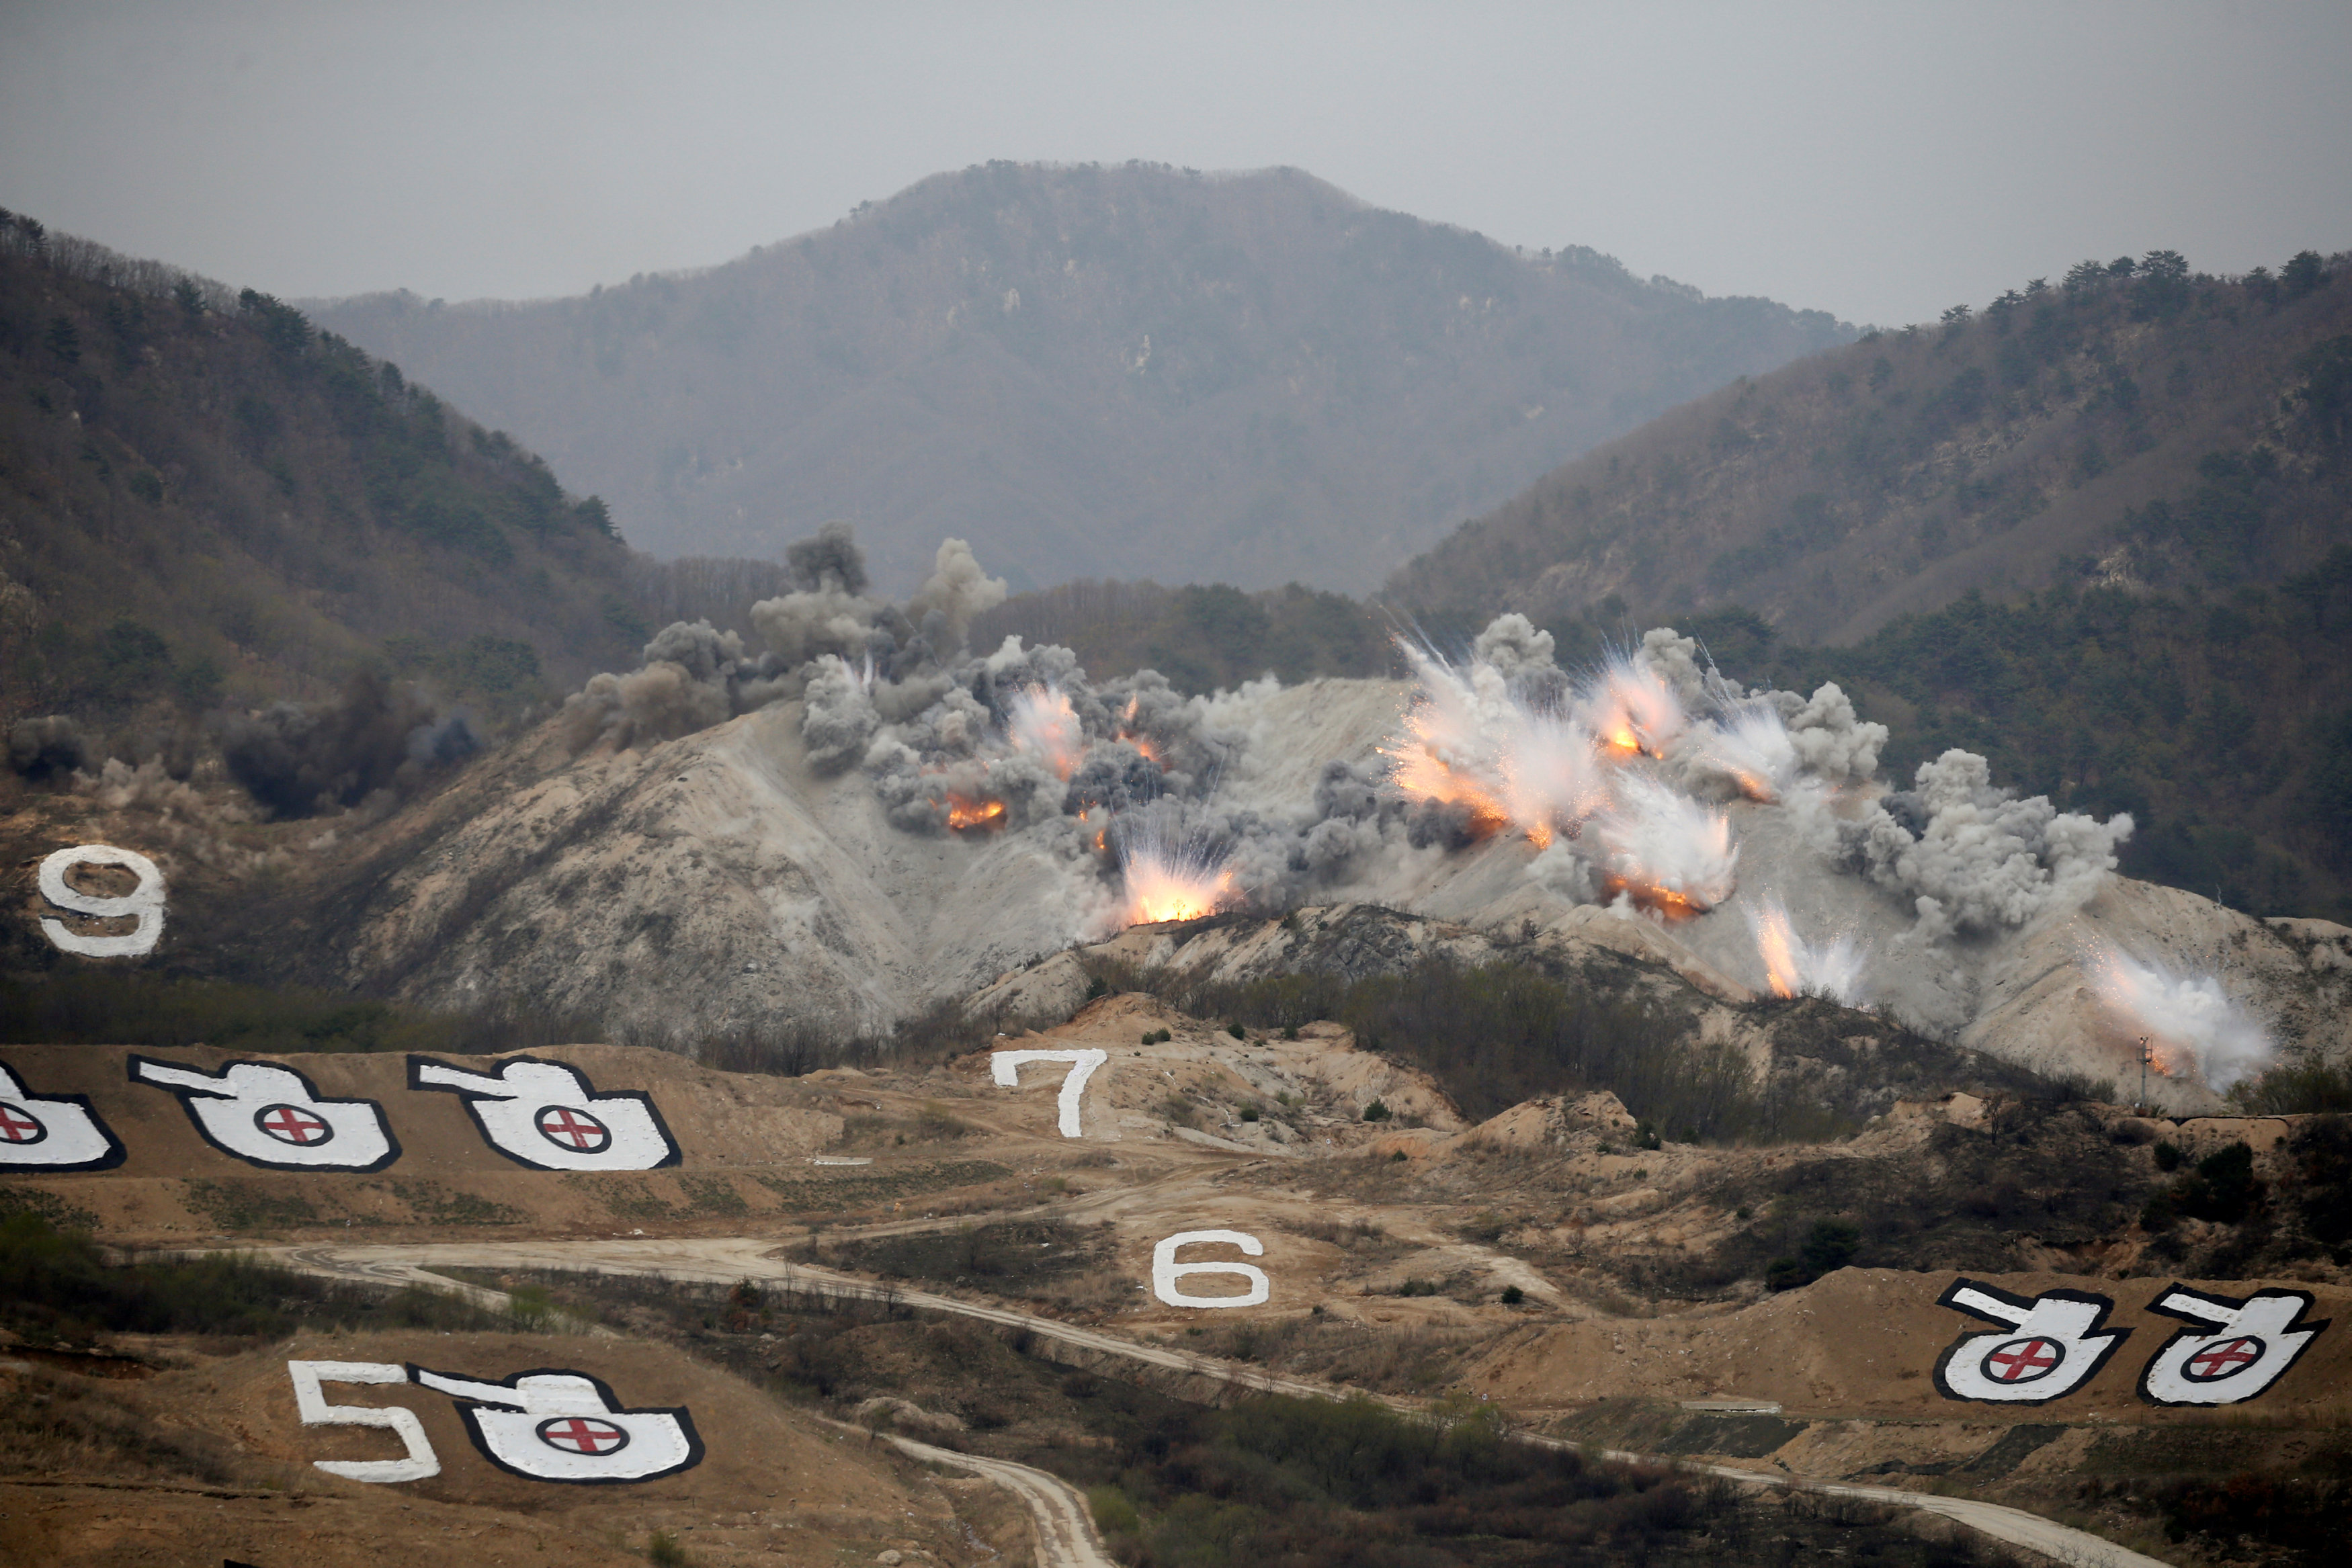 Explosions are seen at a target, during a U.S.-South Korea joint live-fire military exercise, at a training field, near the demilitarized zone, separating the two Koreas in Pocheon, South Korea April 21, 2017. Picture taken on April 21, 2017. REUTERS/Kim Hong-Ji TPX IMAGES OF THE DAY